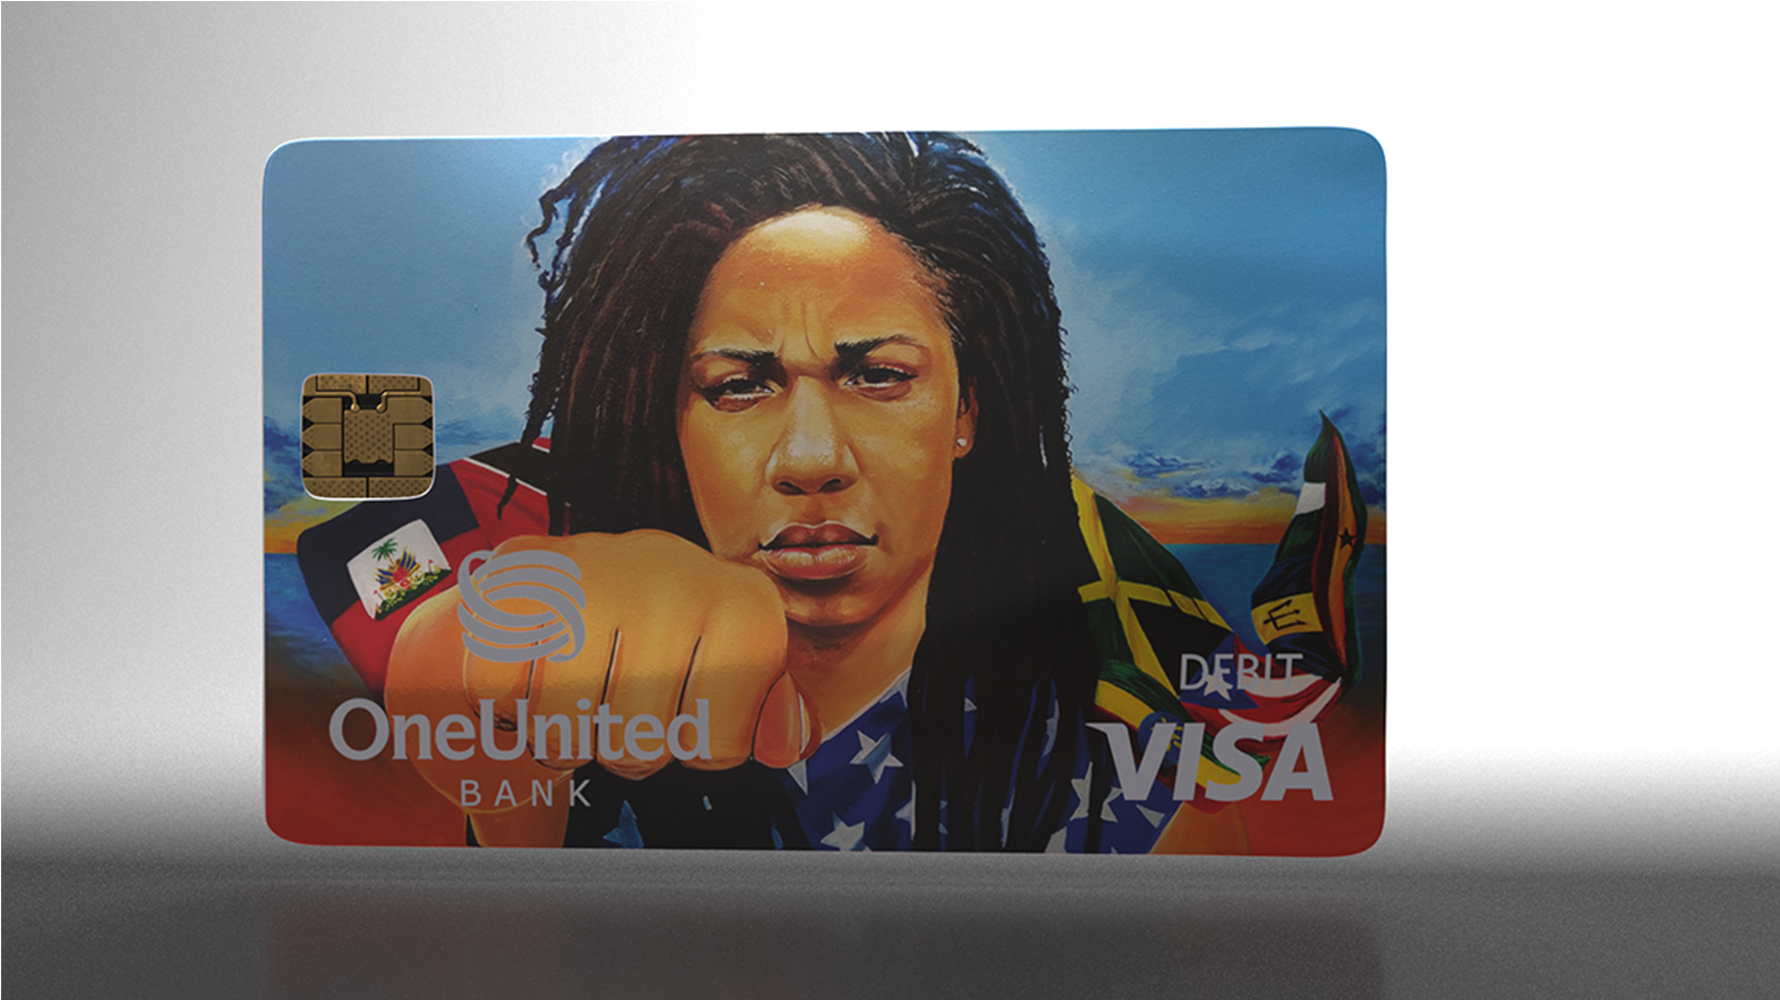 A card with a picture of a woman with dreadlocks.